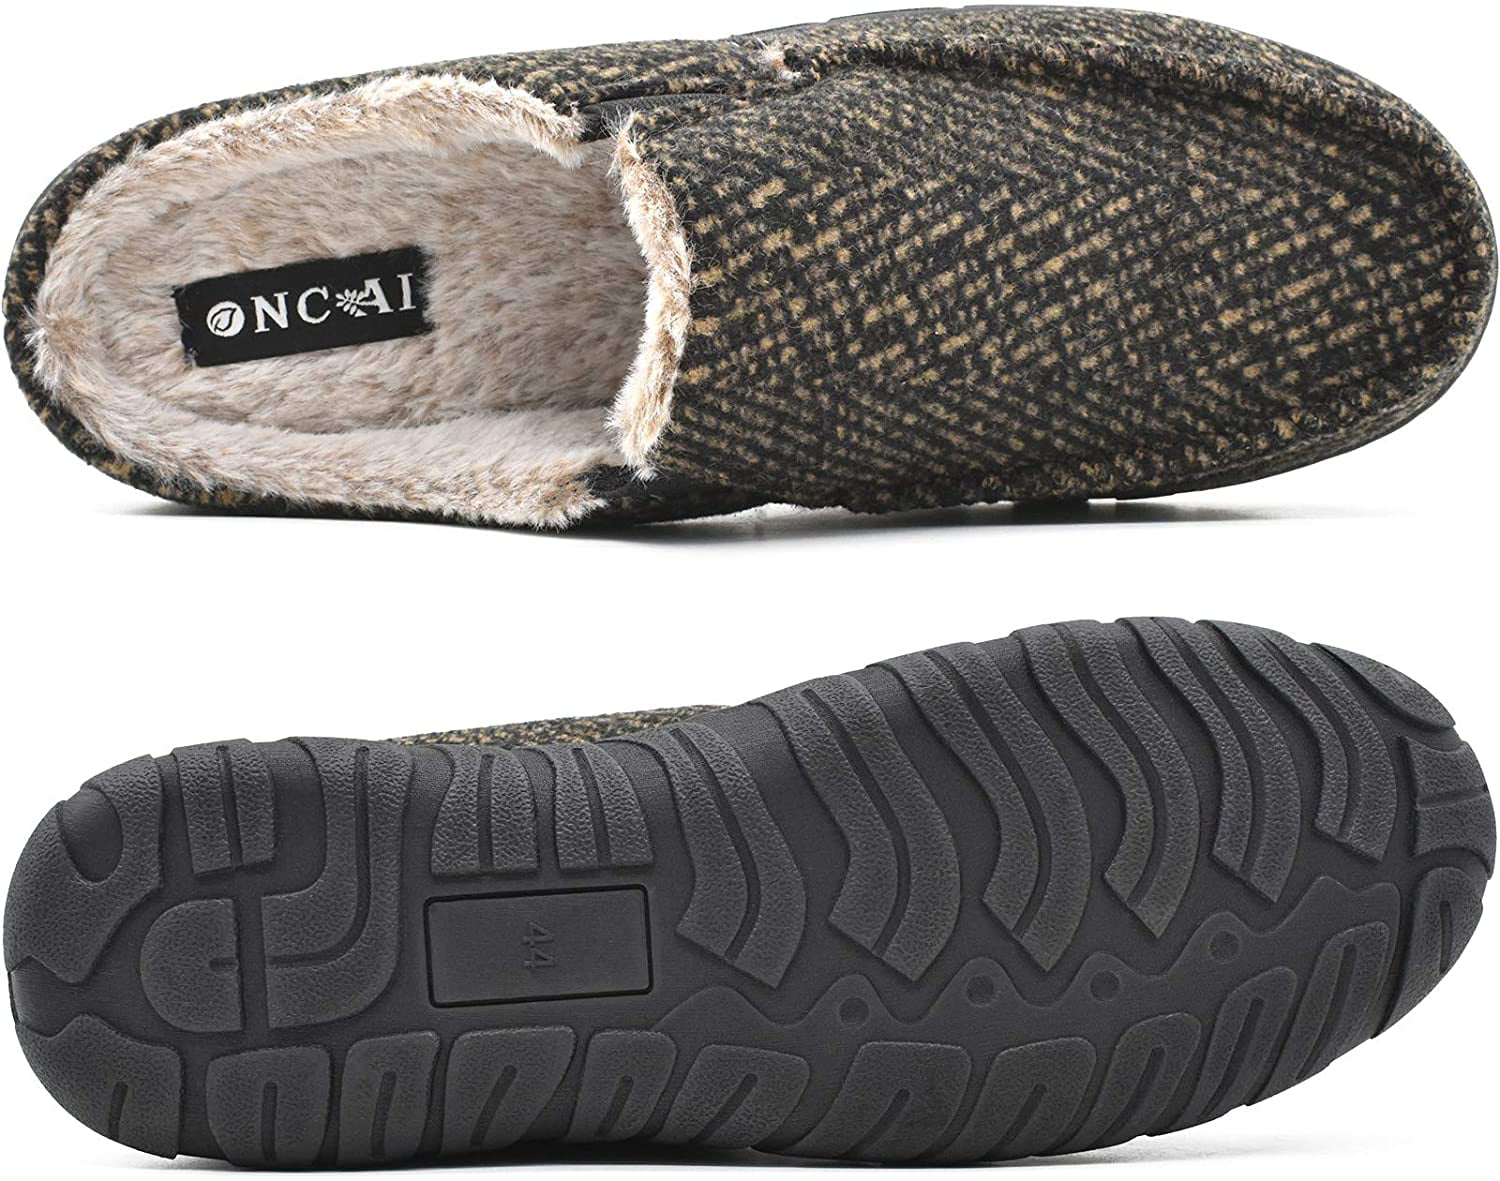 ONCAI Mens Slippers,Warm Soft Cotton Blend Orthotic Slippers with Plantar Fasciitis Arch Support Comfort Indoor and Outdoor Moccasins US 7-14 